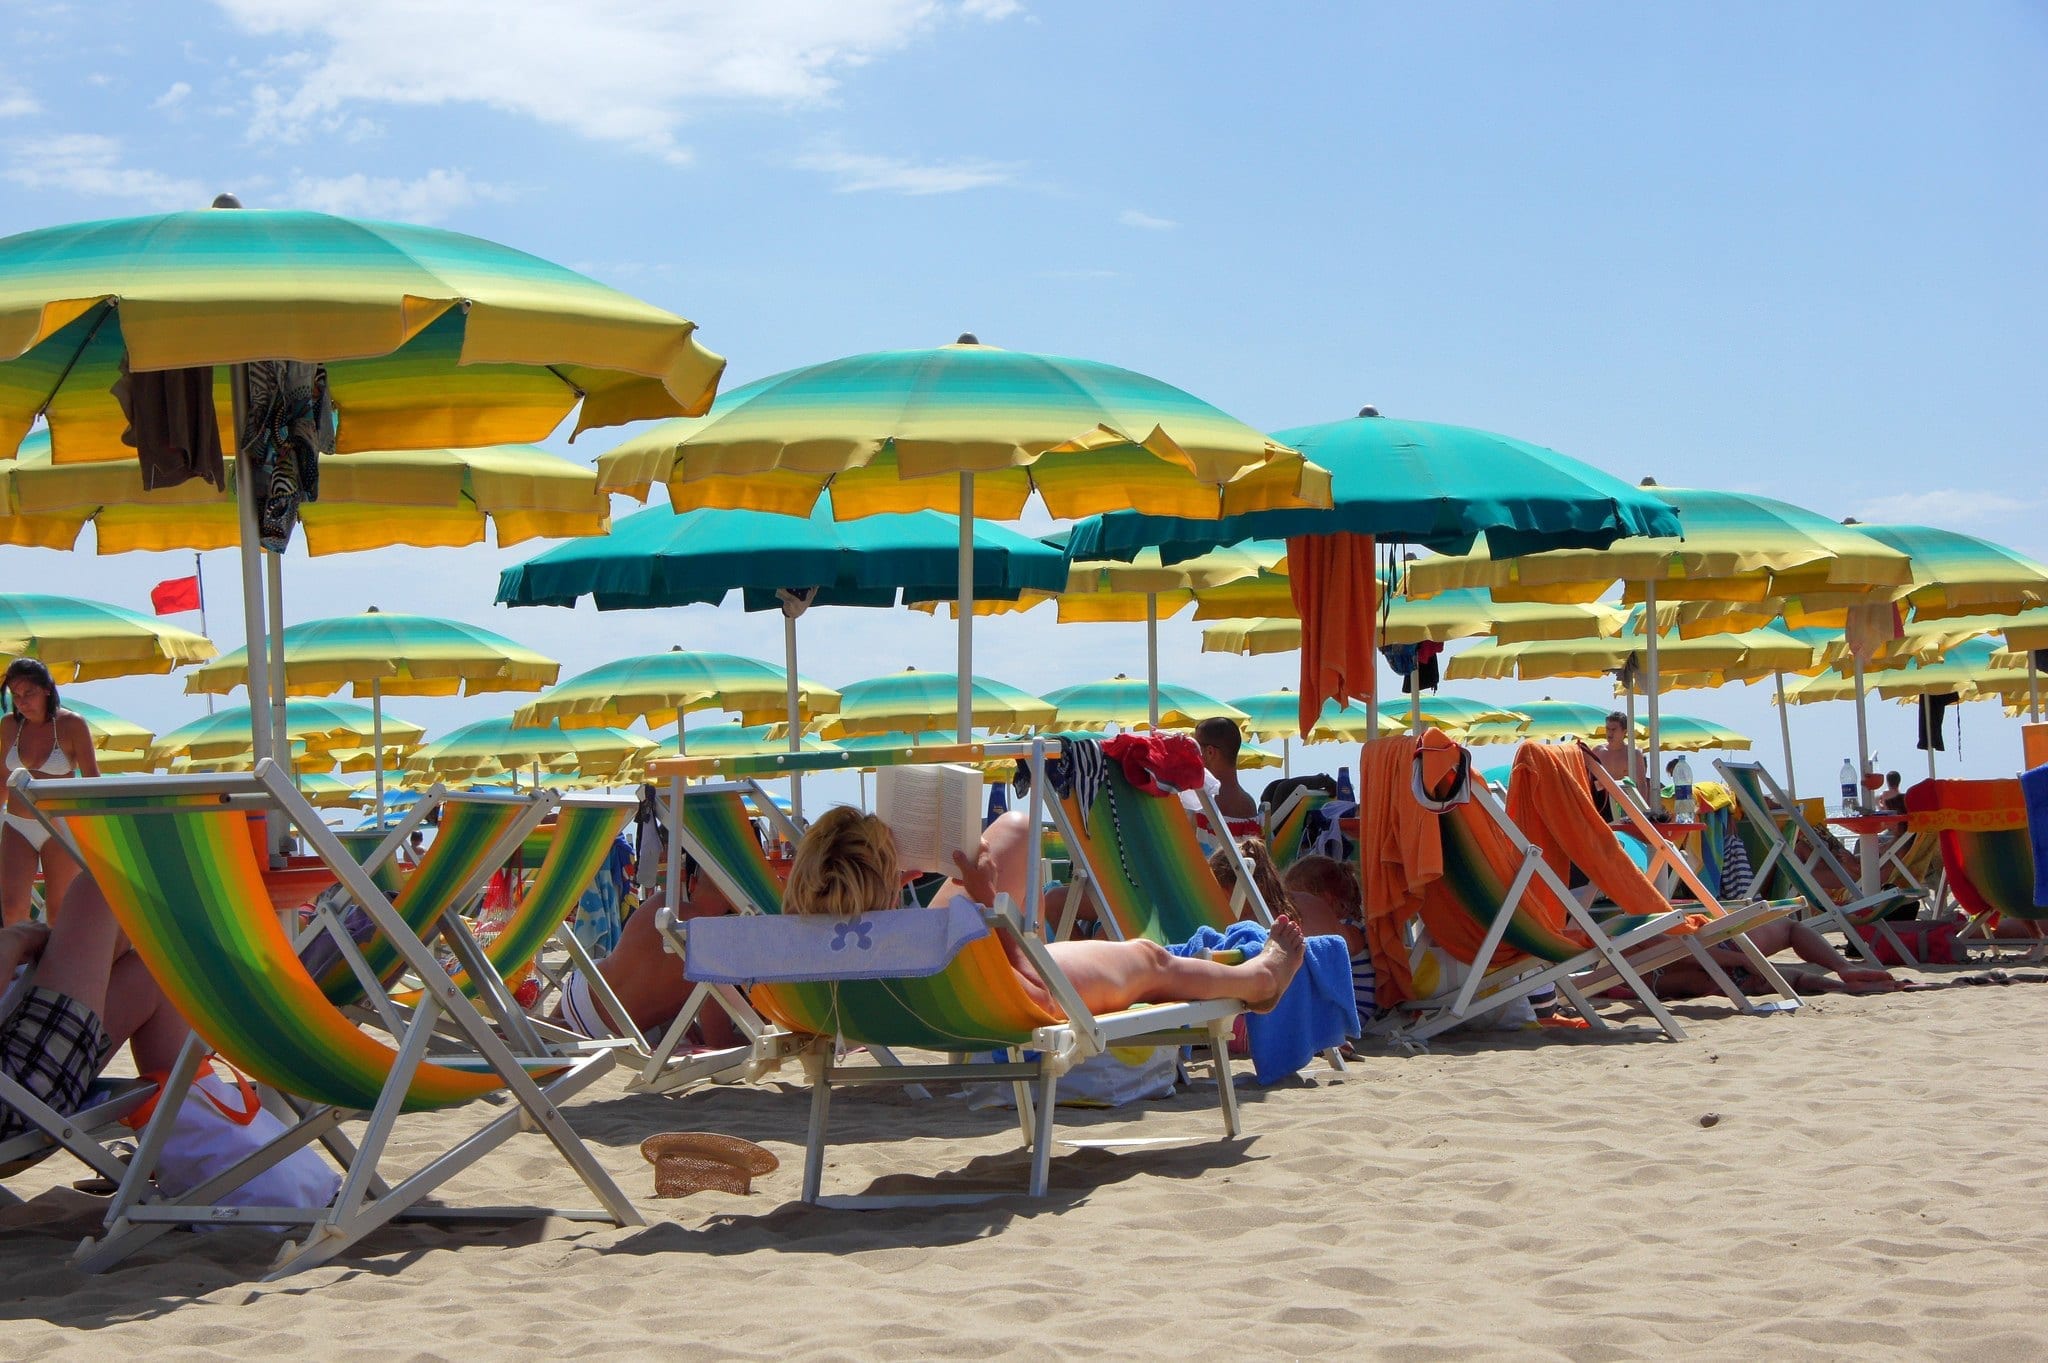 People lounging in colorful blue and yellow beach chairs with umbrellas in Viareggio Italy. 